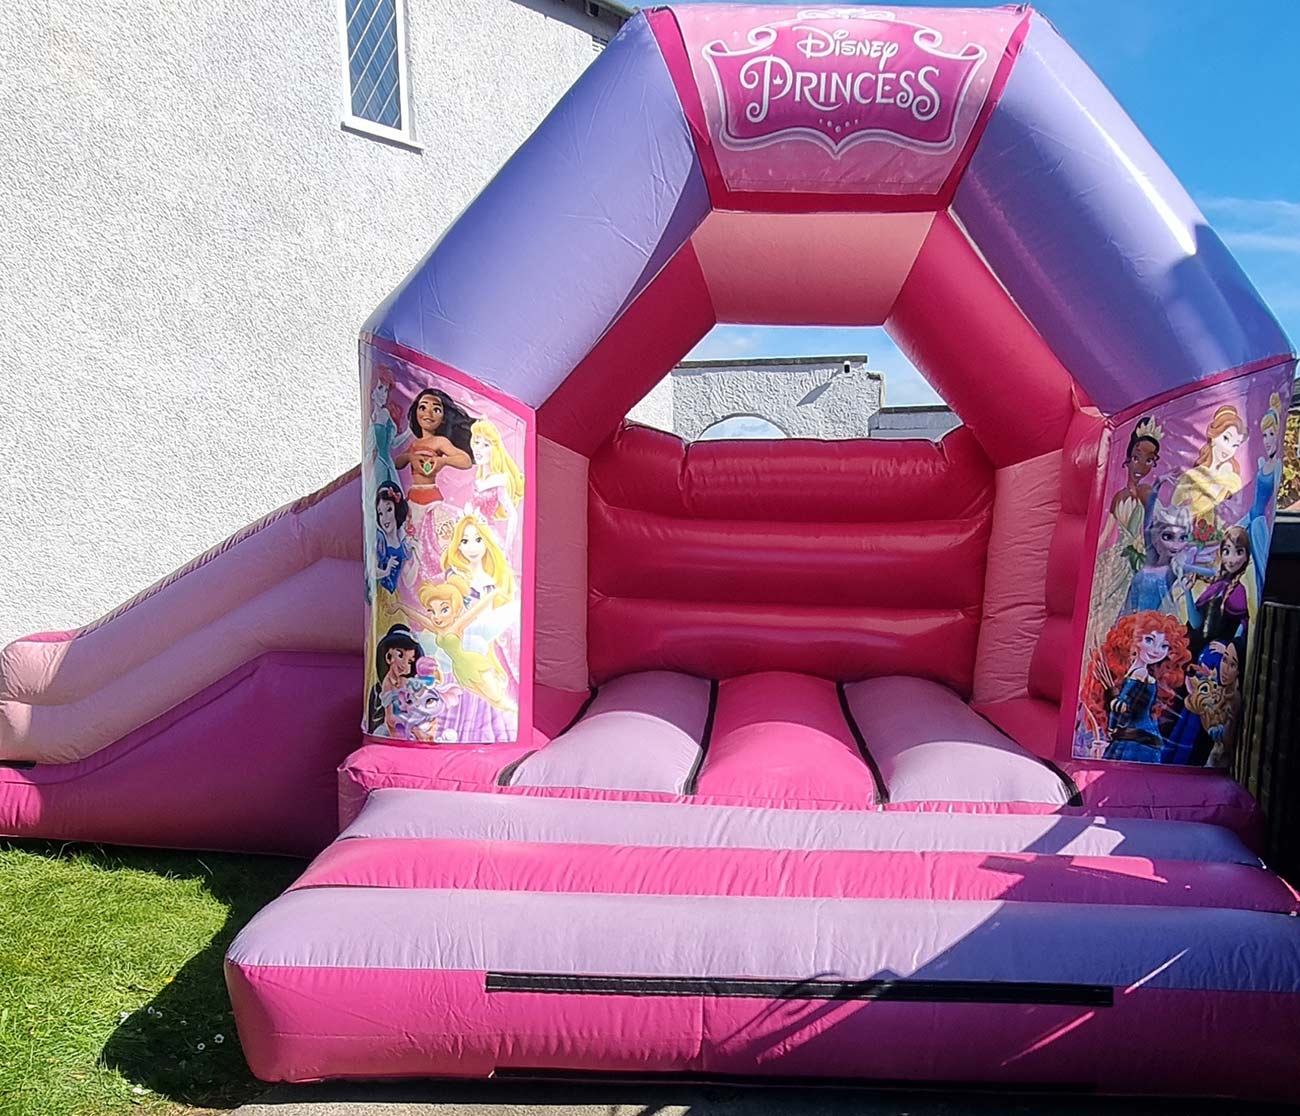 16x14 Disney Princess Slide and Bounce Castle inflatable